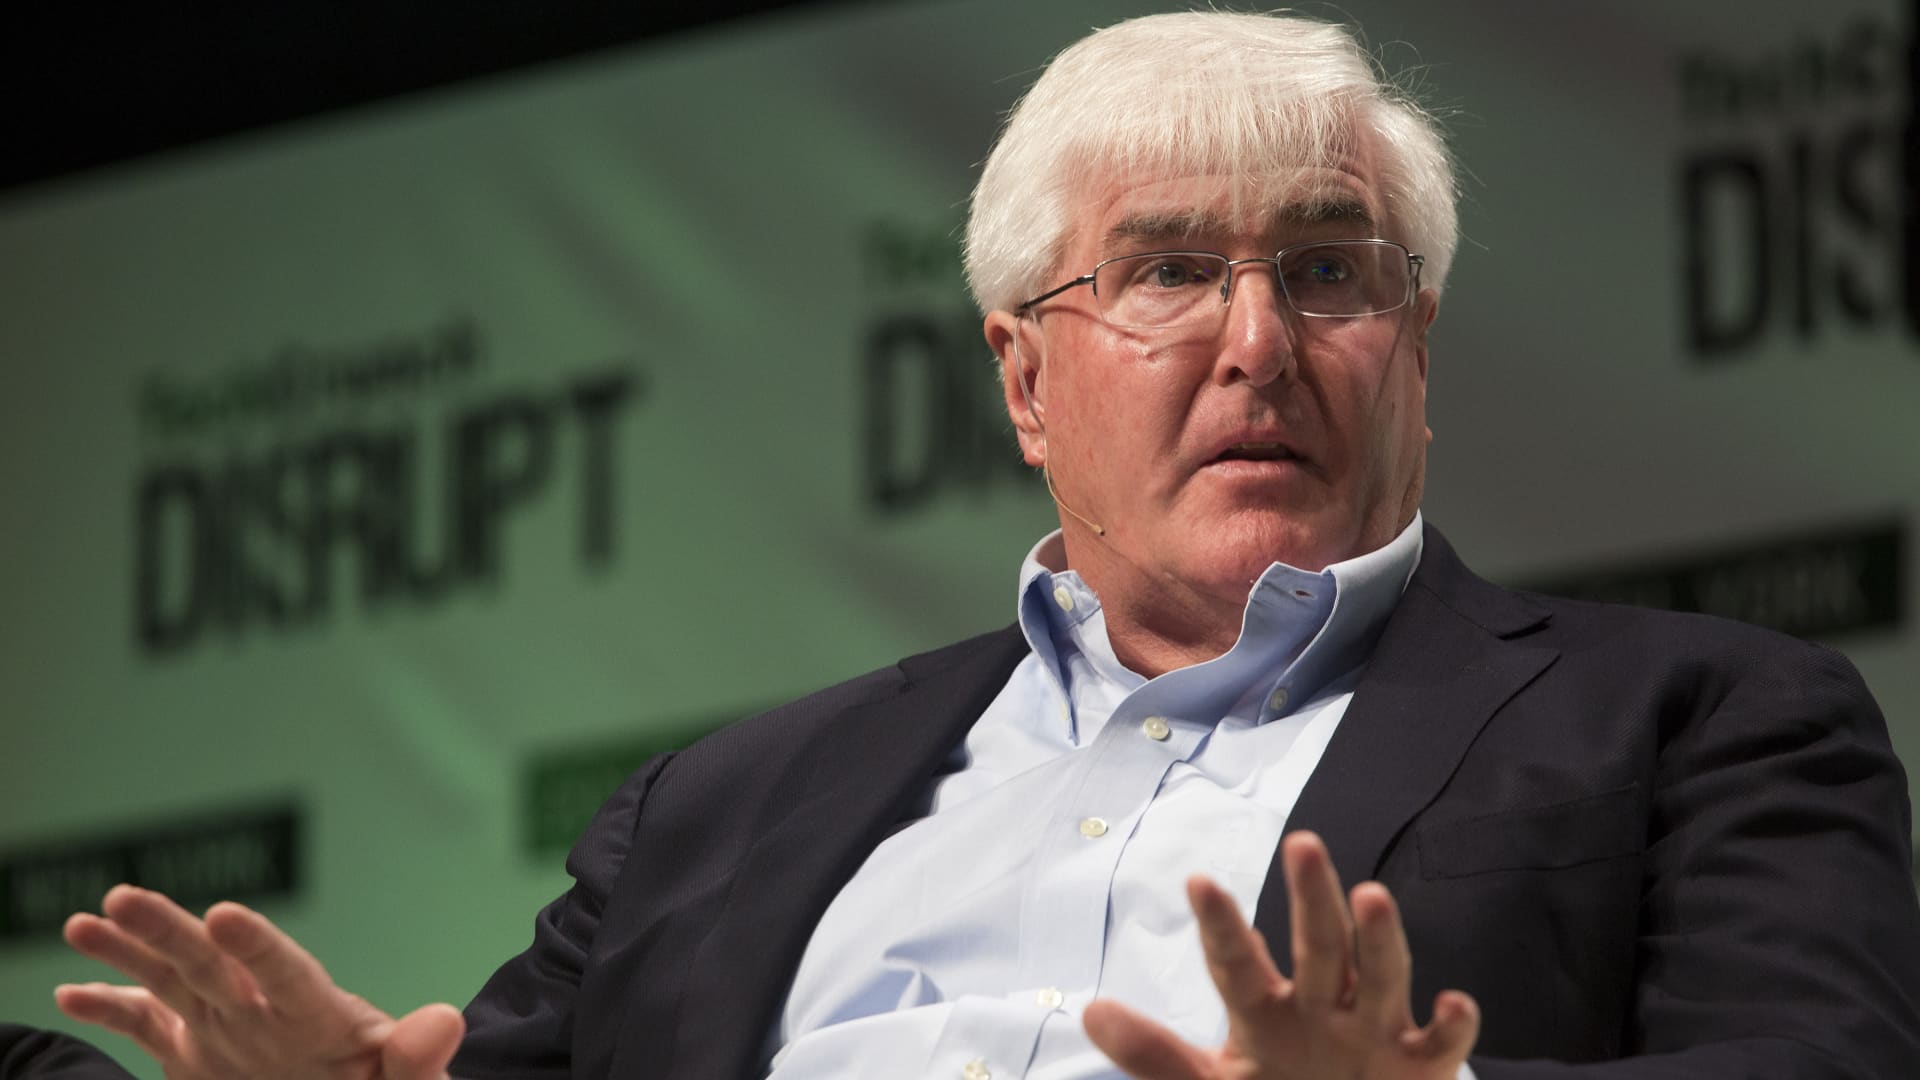 Ron Conway, founder of SV Angel, speaks during the TechCrunch Disrupt NYC 2015 conference in New York, May 4, 2015.